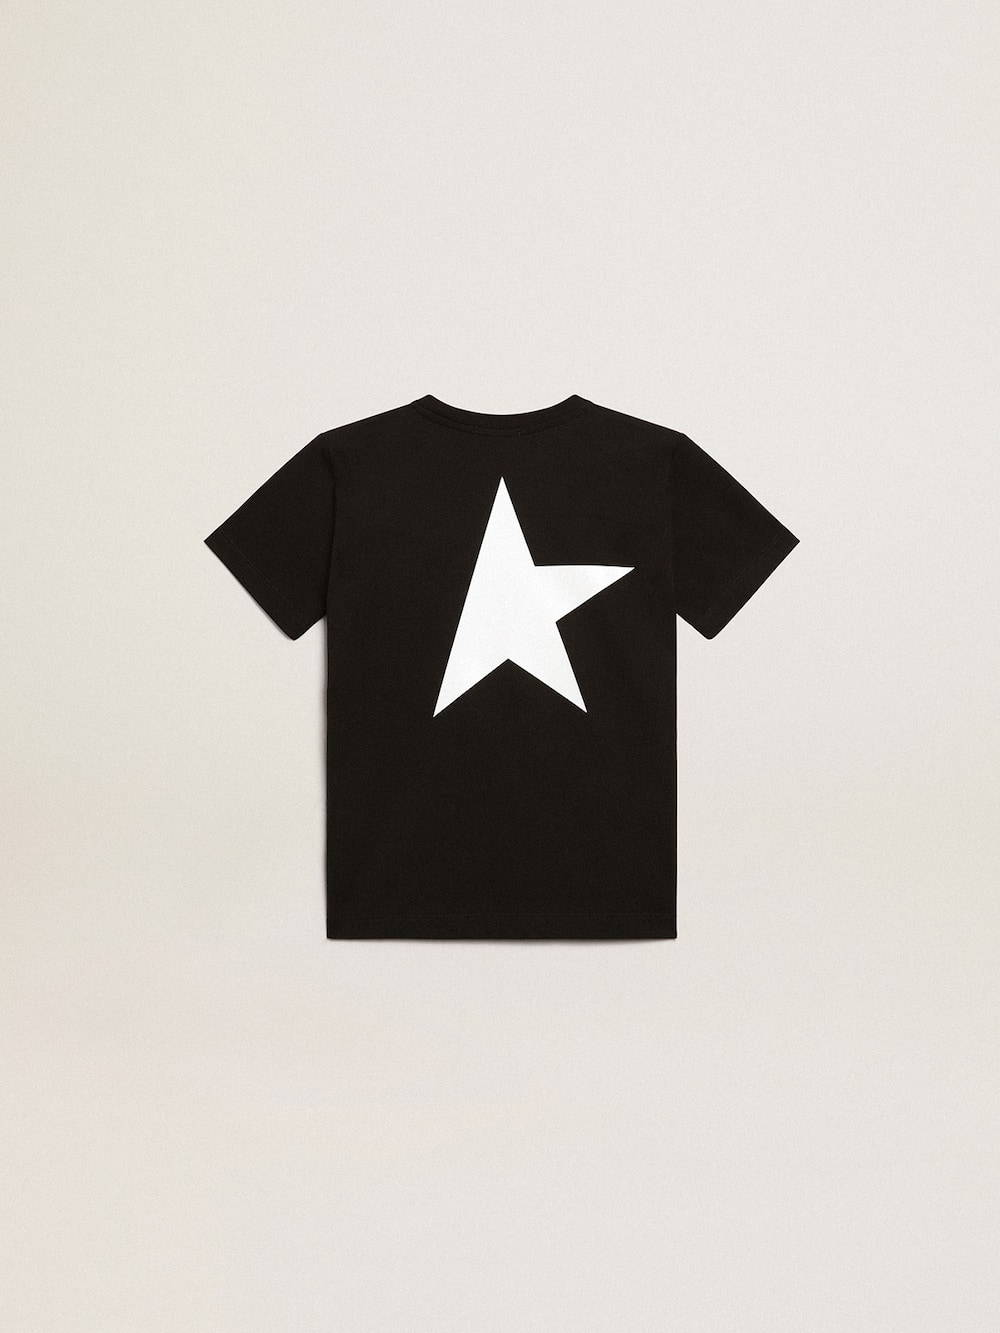 Golden Goose - Black T-shirt with contrasting white logo on the front and maxi star on the back in 